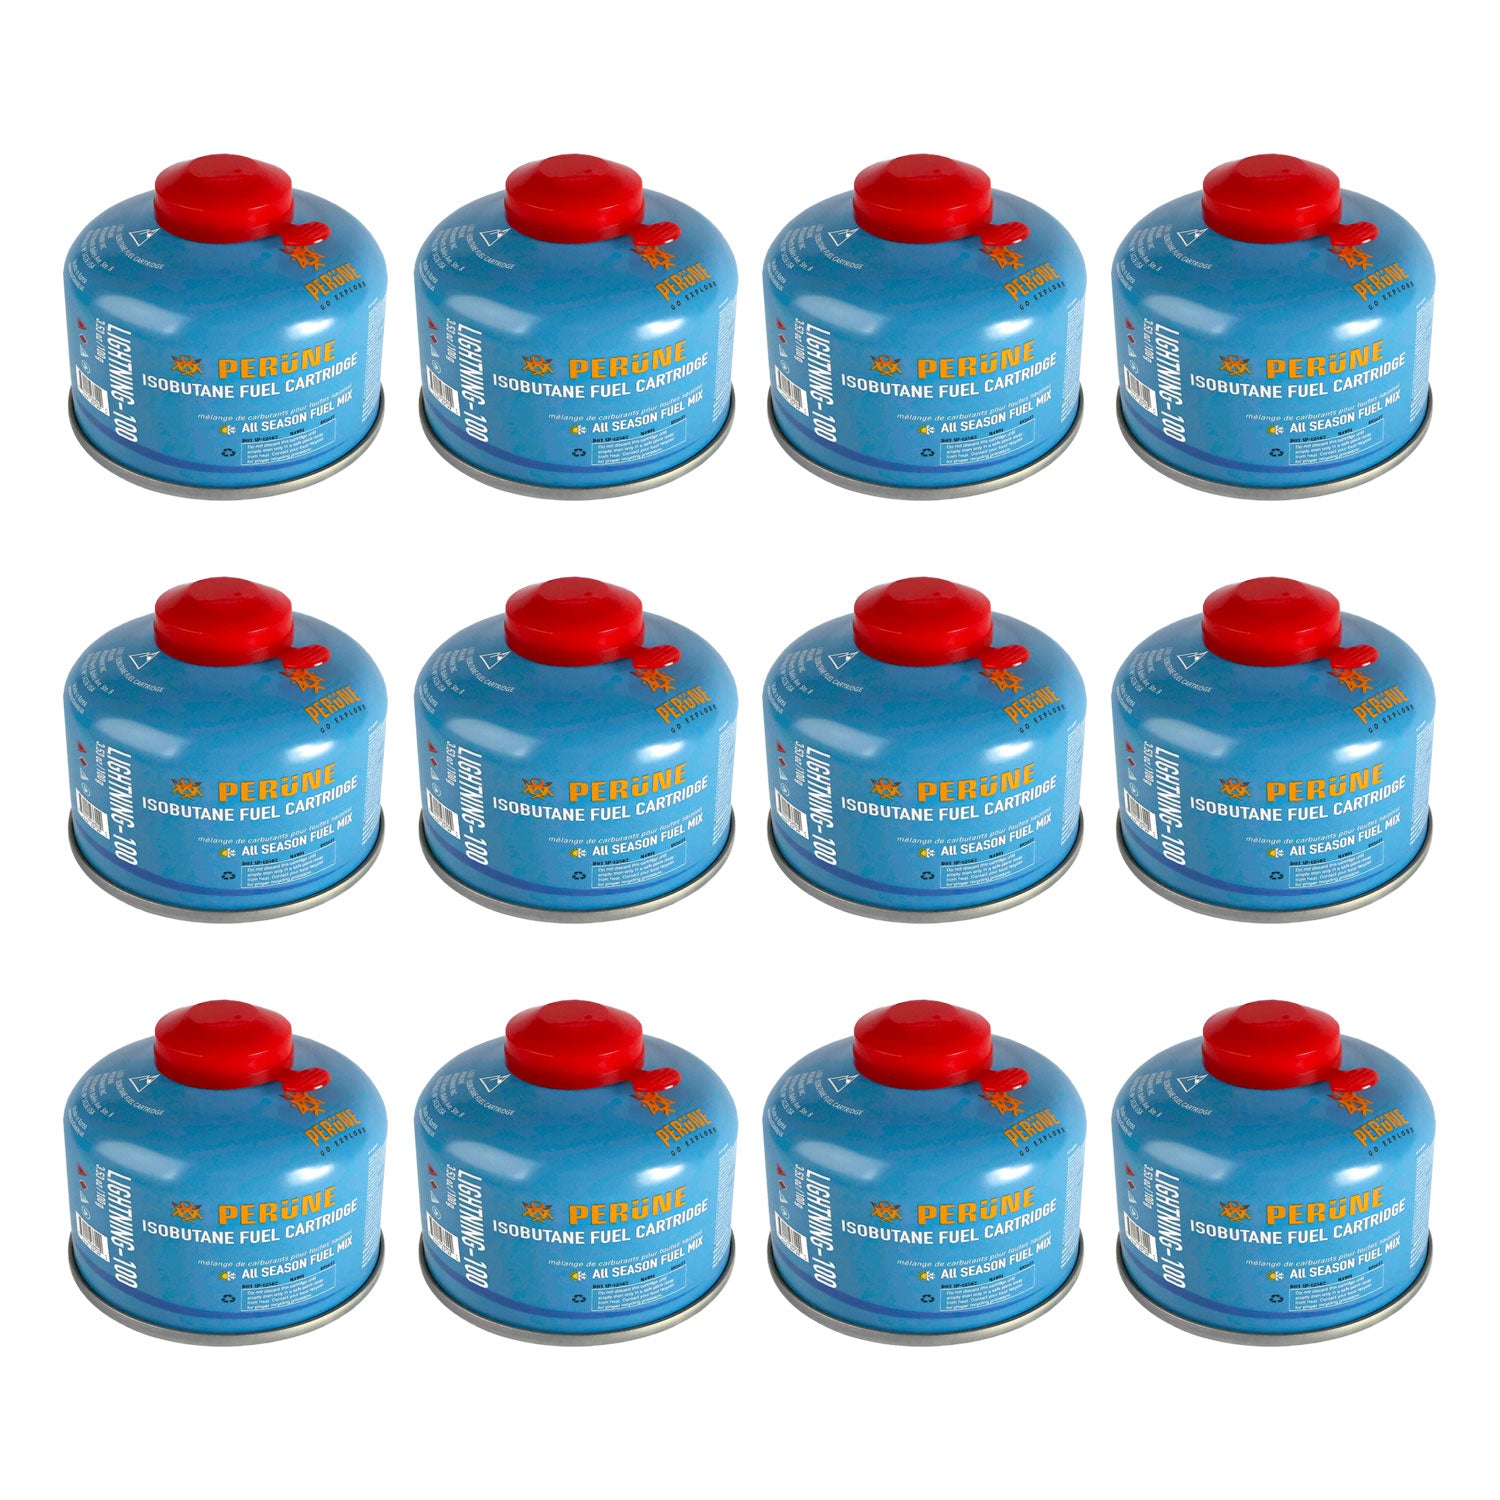 100 g Isobutane Camping Fuel Blend Canister (6-Pack)